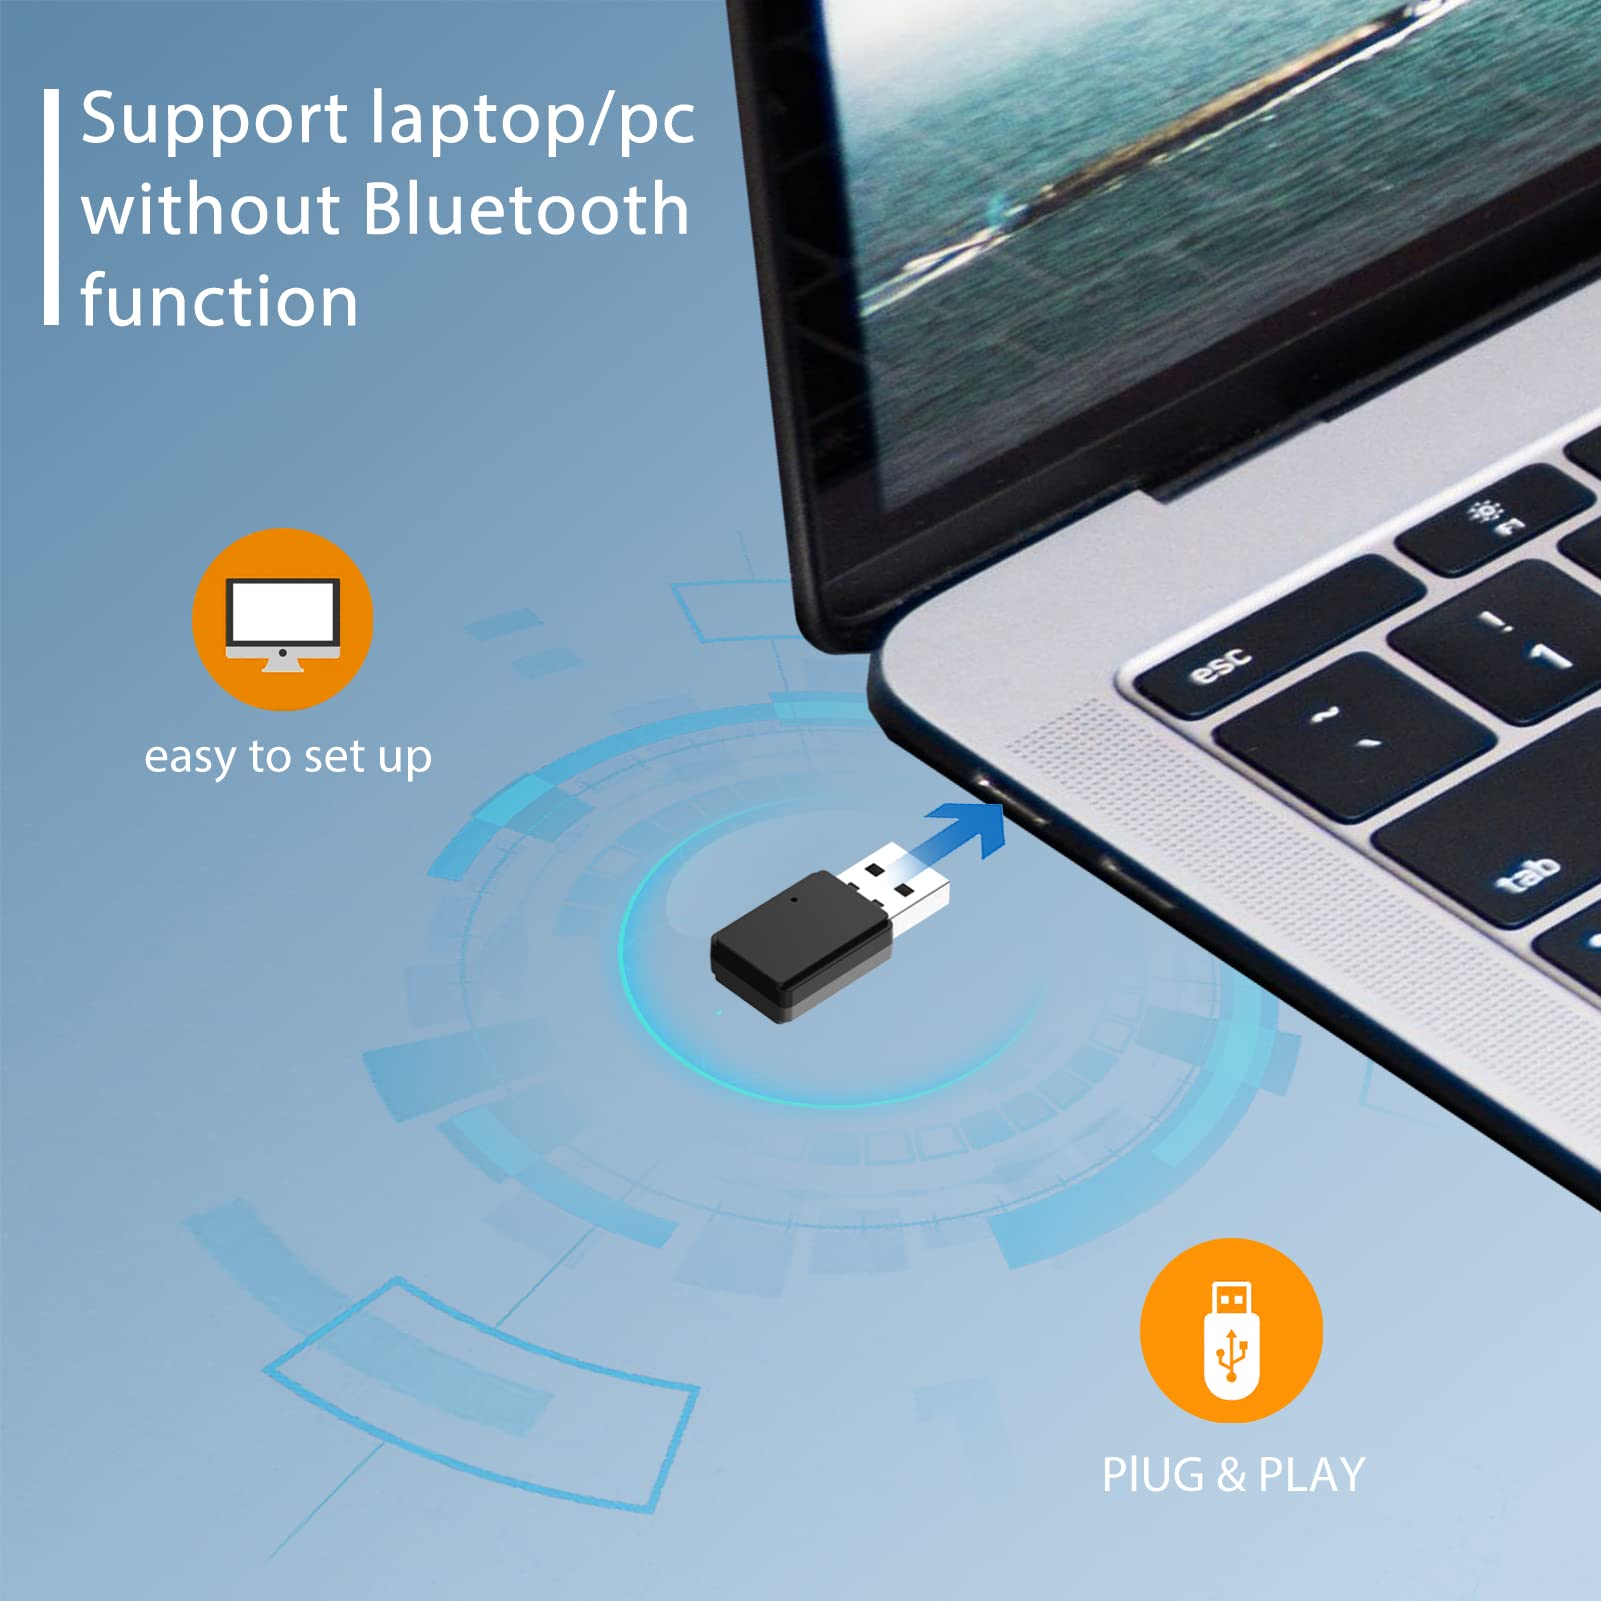 Support laptop/pc without bluetooth function,Easy to set up,Plug & Play.